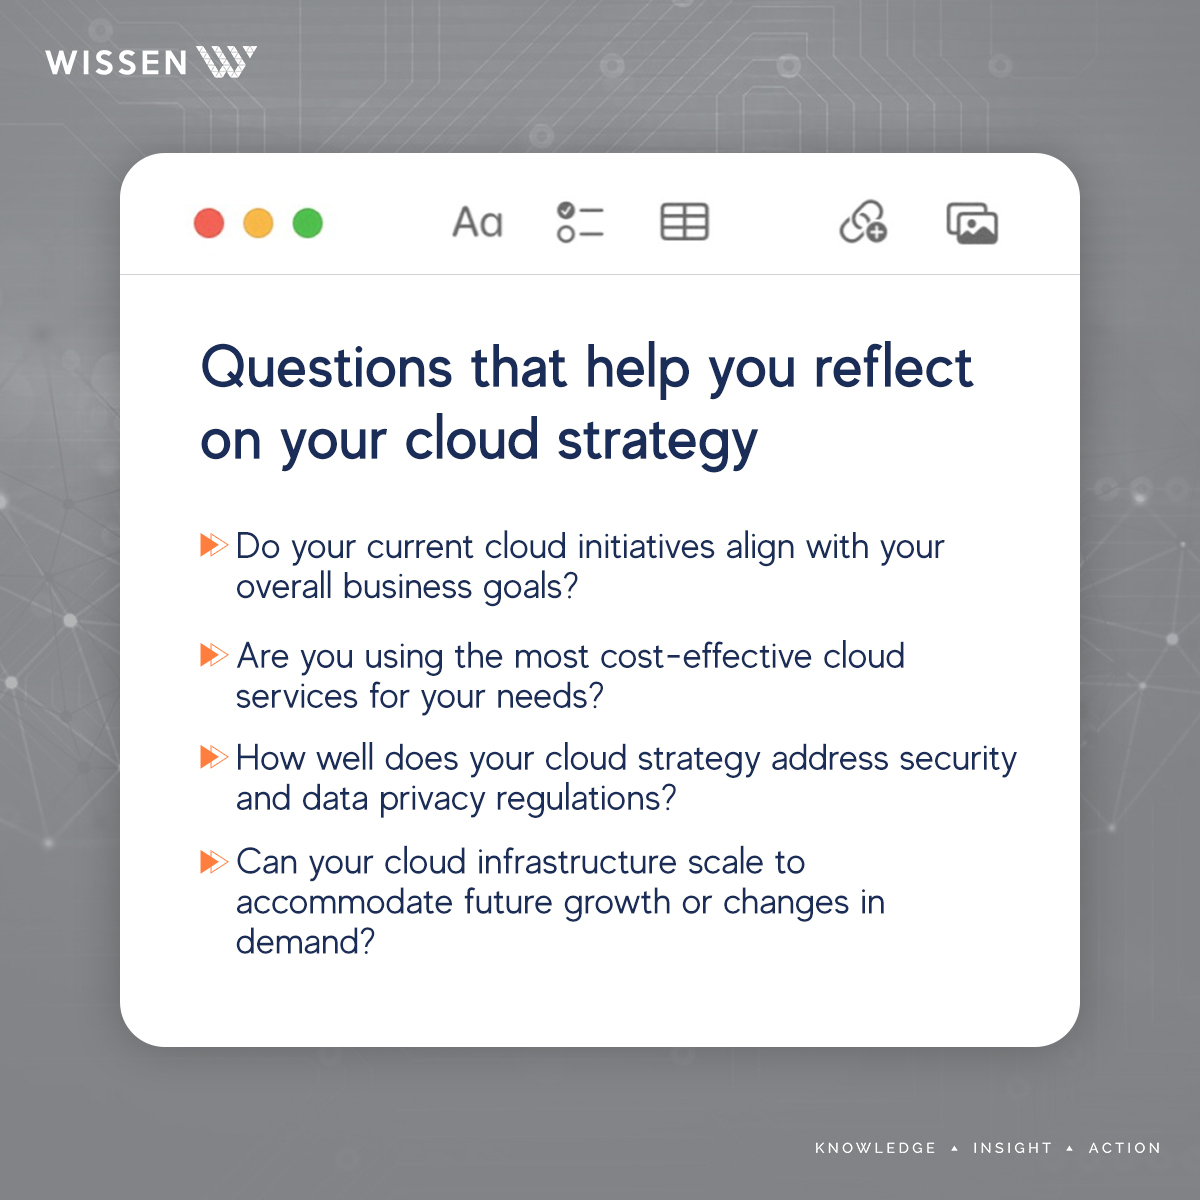 If you’re looking to scale or take the next step in your cloud journey, here are some questions to ask yourself to help you find your way.

#Wissen #CloudComputing #GrowthMindset #Business #CloudStrategy #CloudManagement